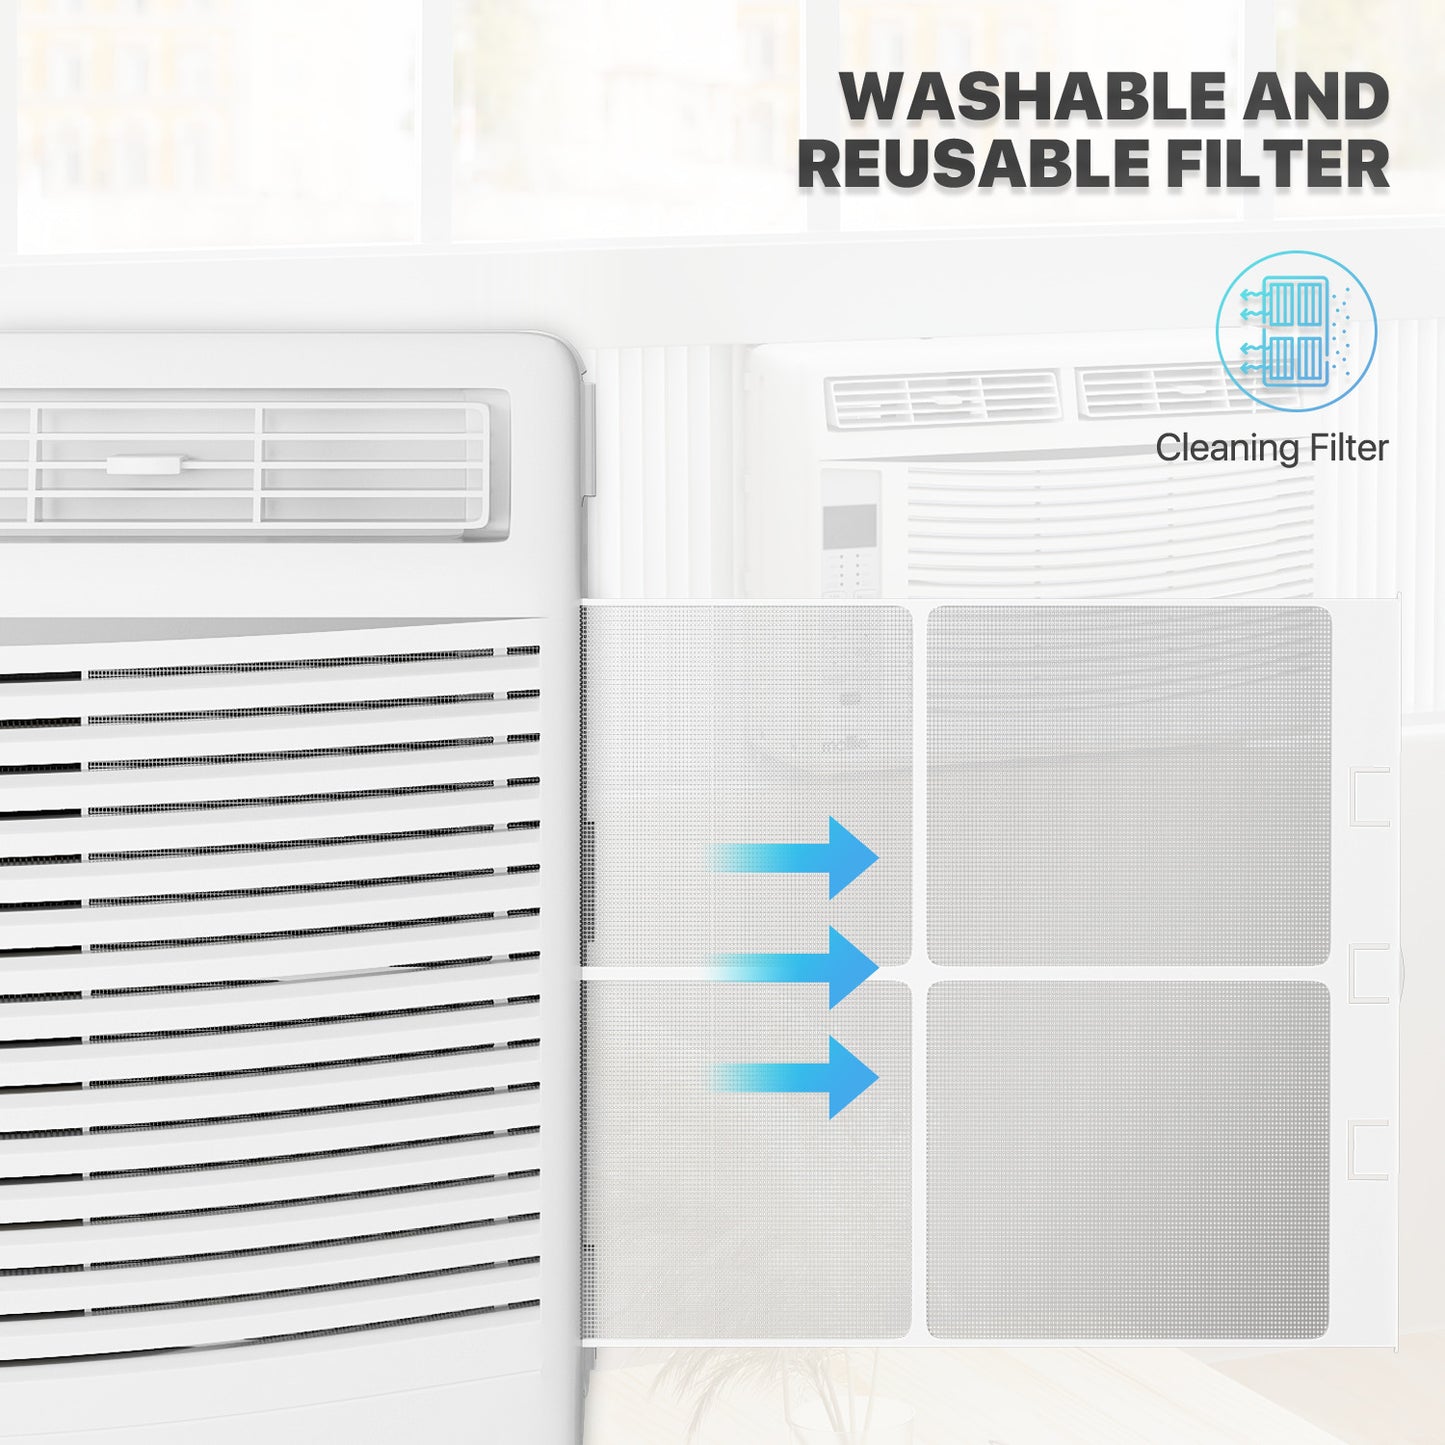 Electrical - Window Air Conditioner w/remote-6K